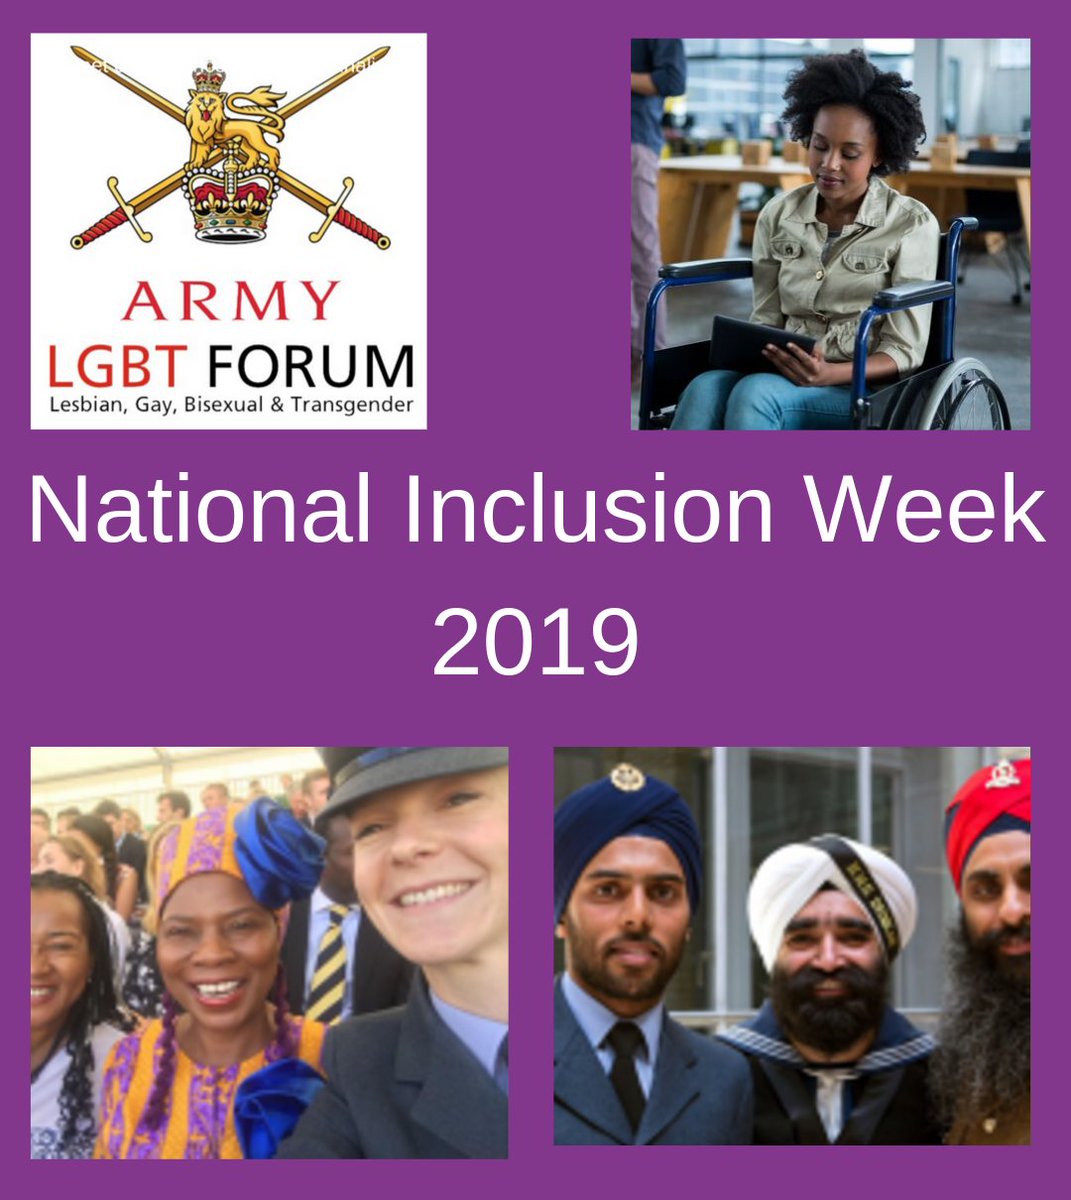 This is National Inclusion Week & the theme is #EverydayInclusion: Celebrate & Inspire. The timing is perfect! Recognise a person or group that supports inclusion & diversity within the #ArmedForcesCommunity by nominating them for a #soldieringonaward here bit.ly/2mbvO9O